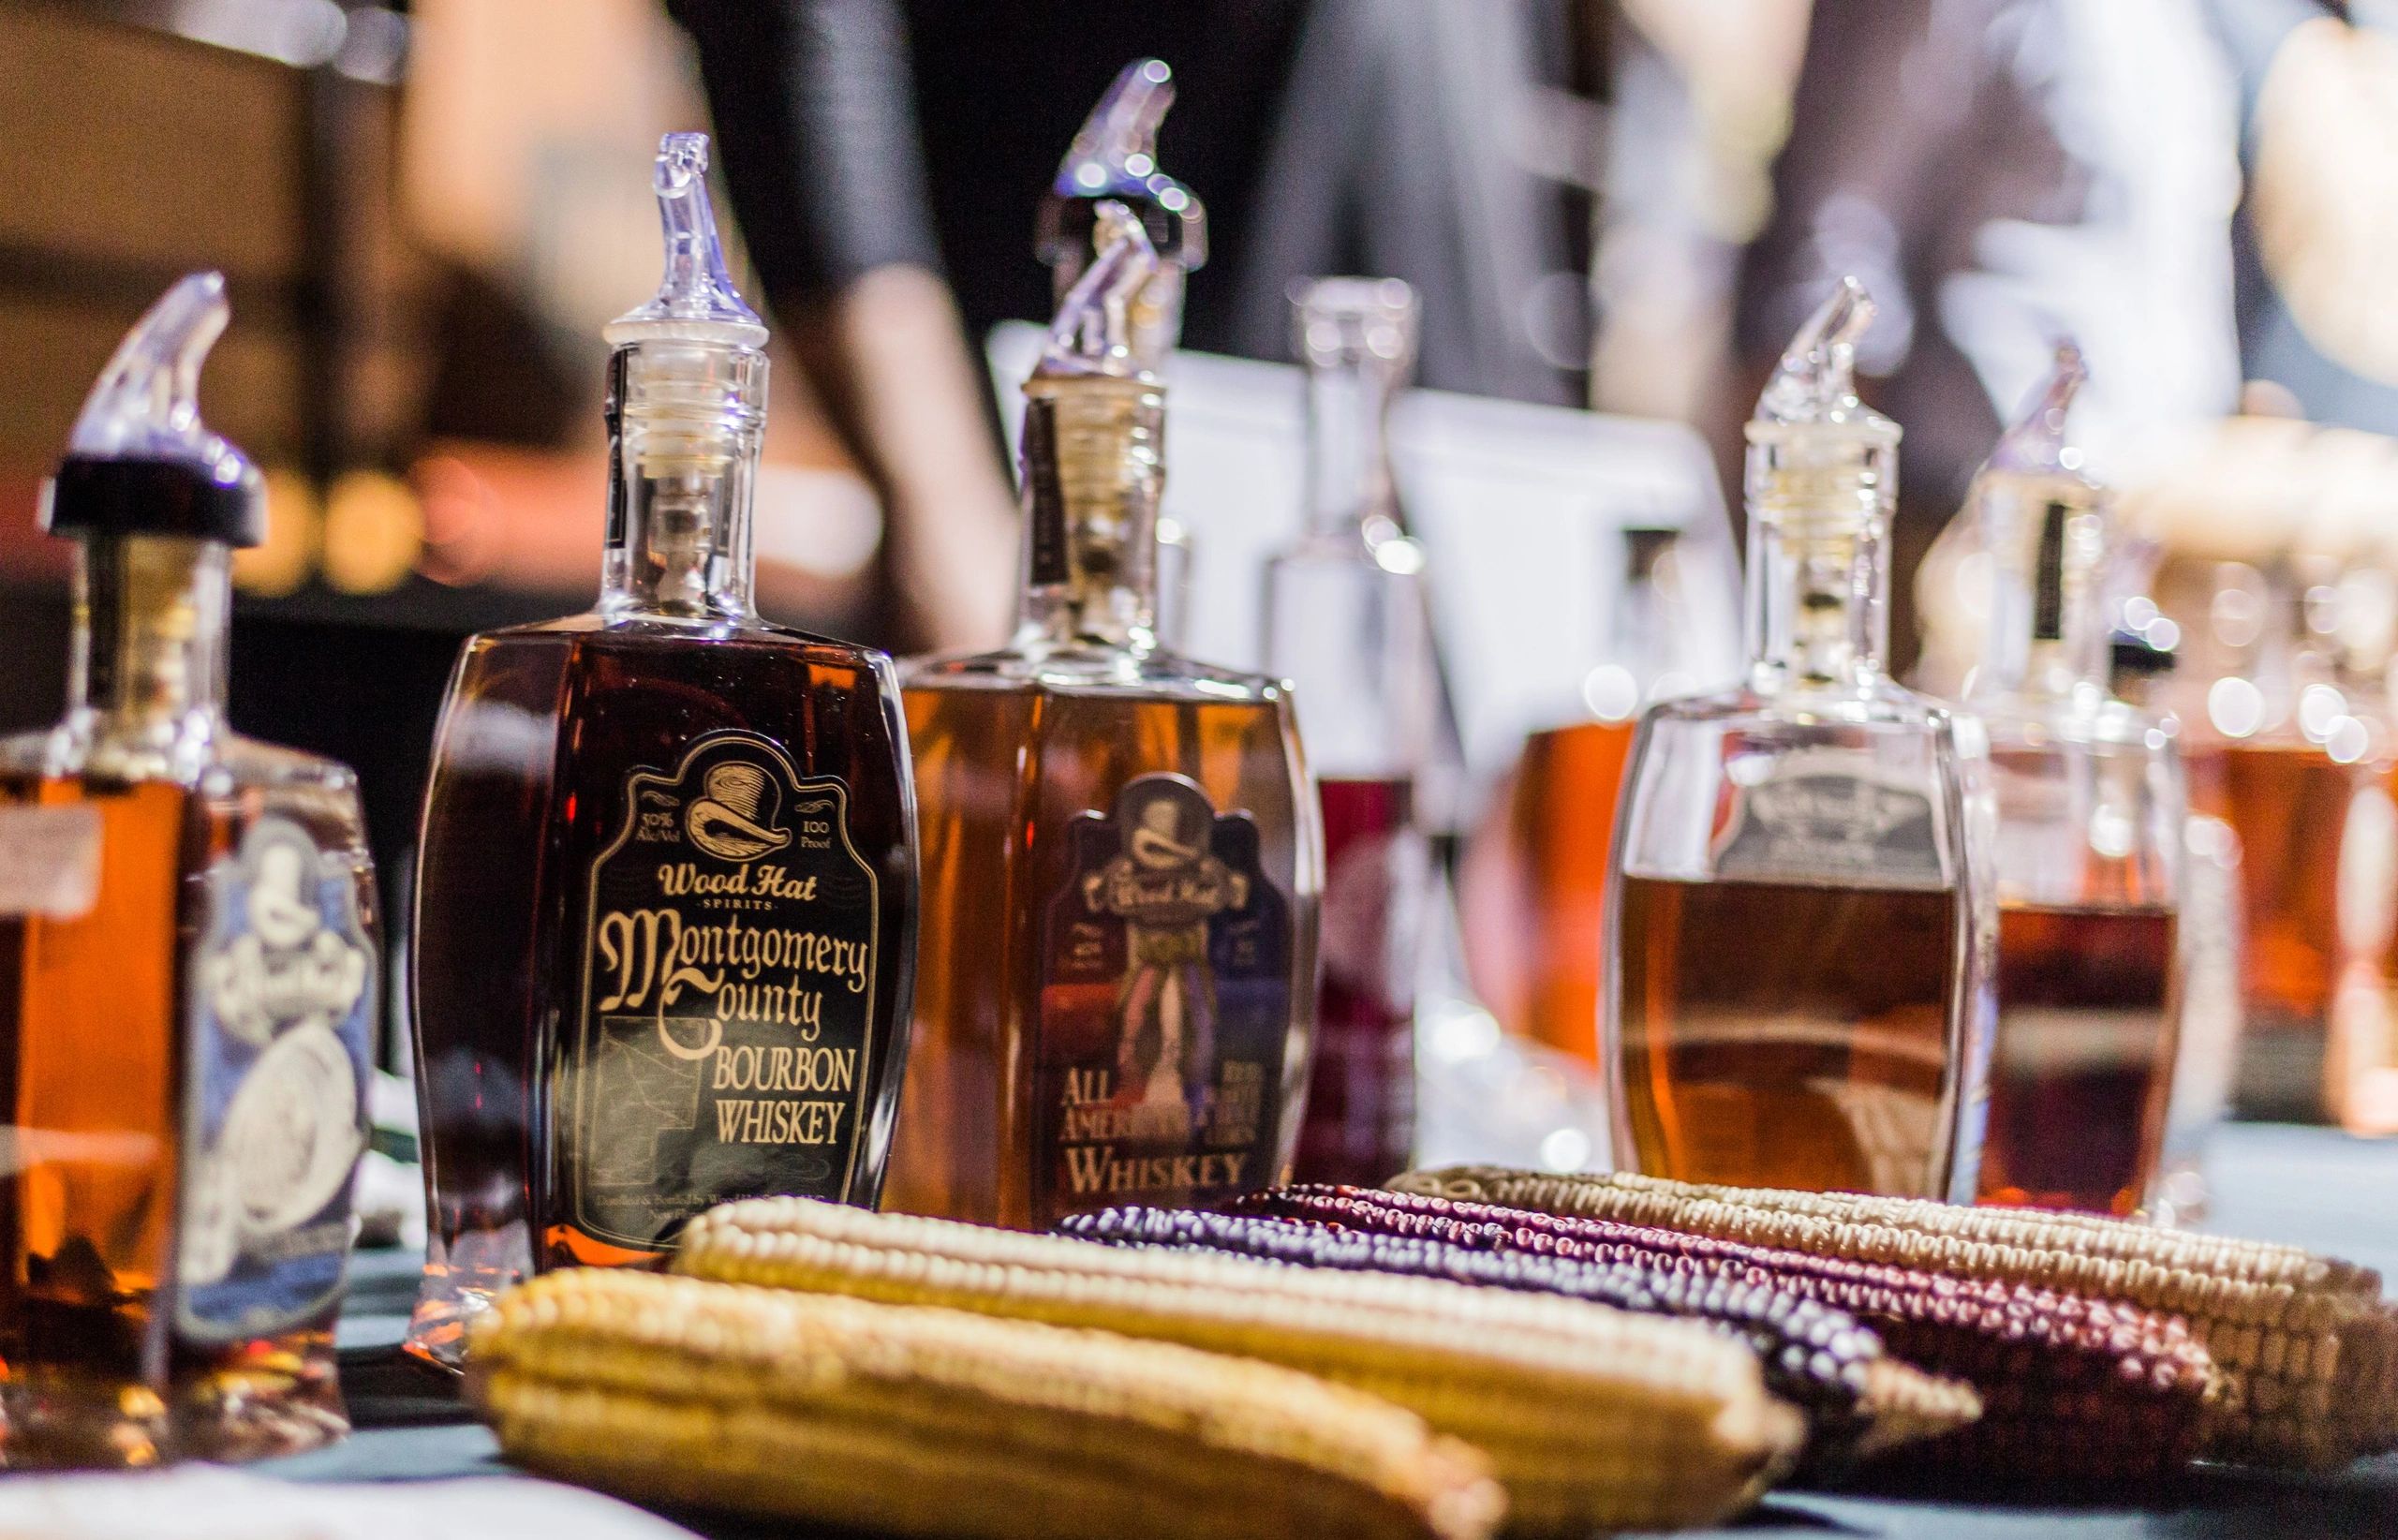 Heartland Whiskey Competition